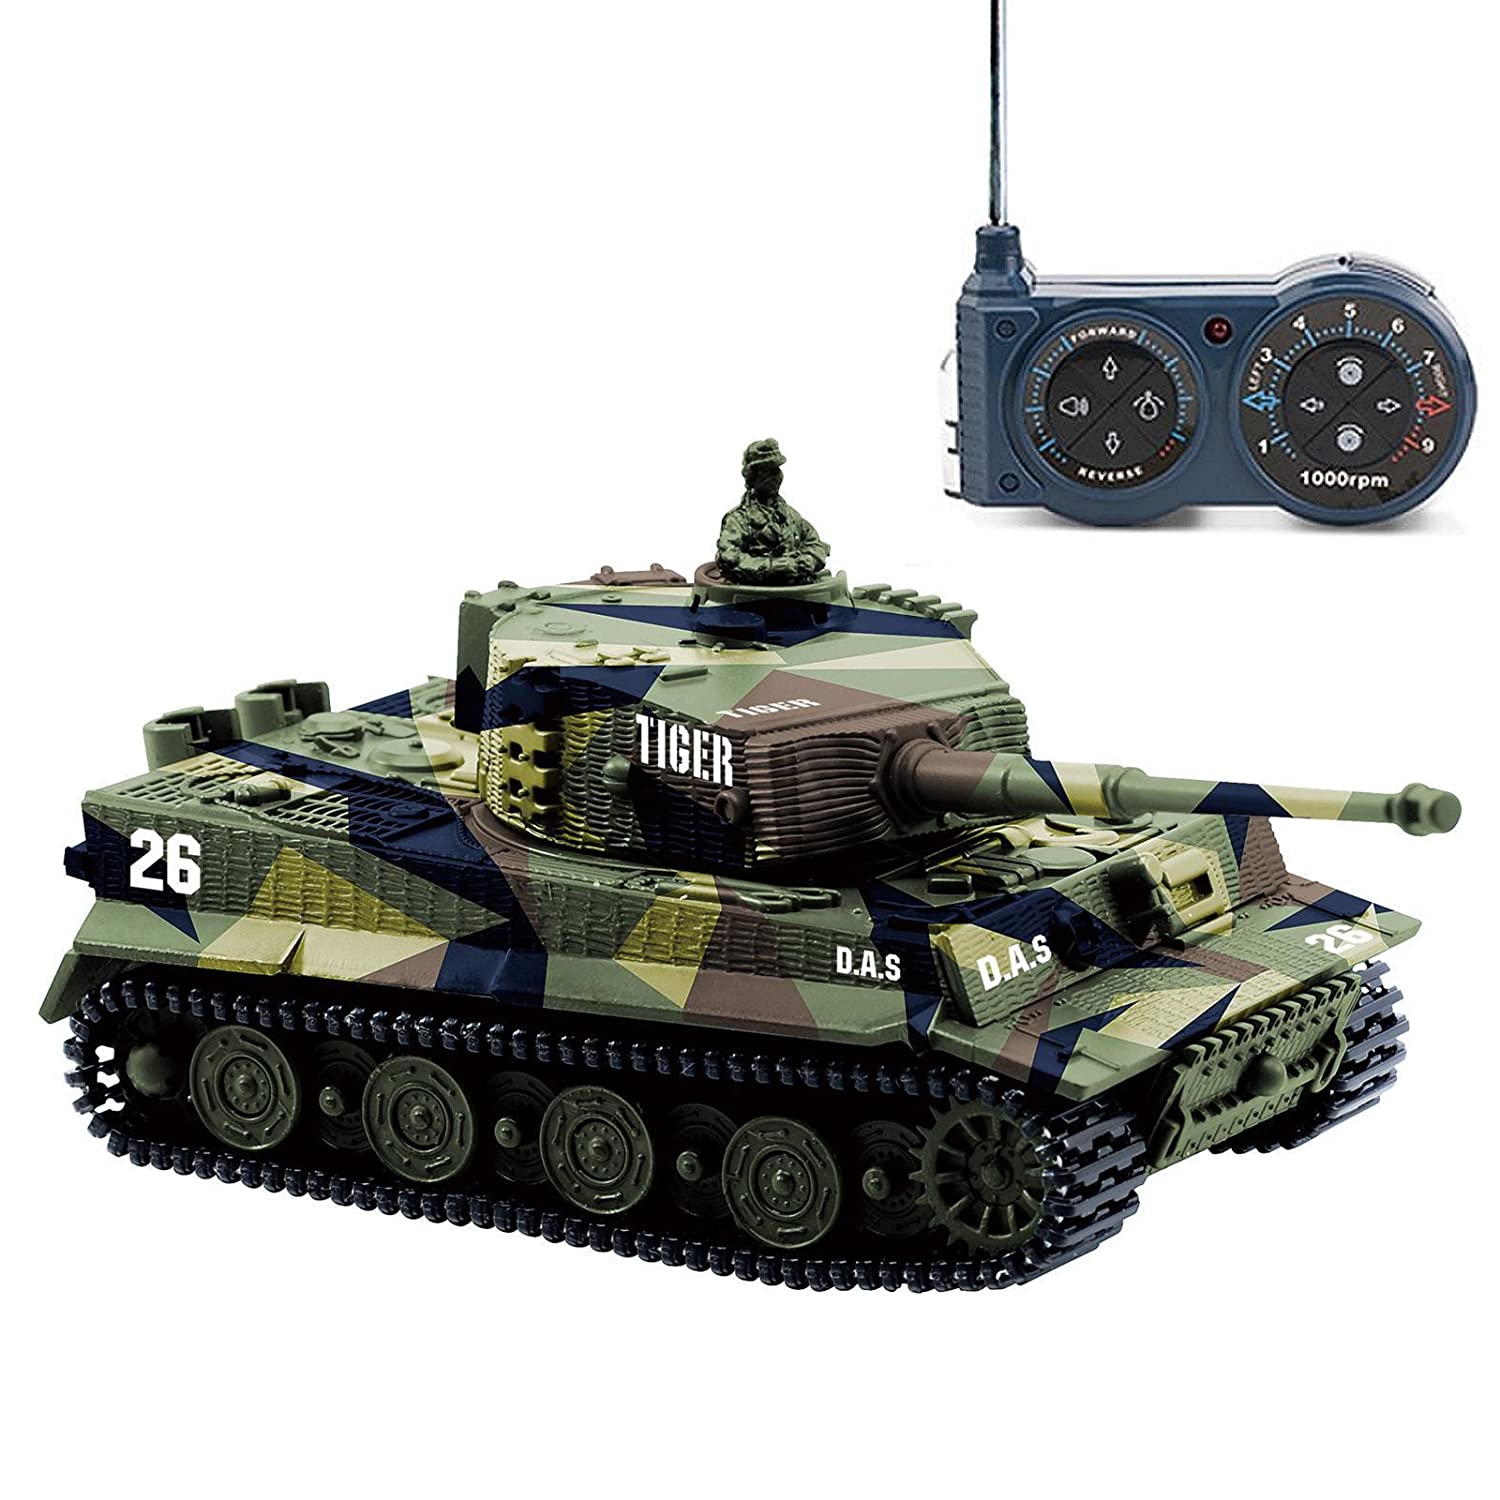 Top 9 Best Remote Control Tanks Battle Reviews in 2023 1